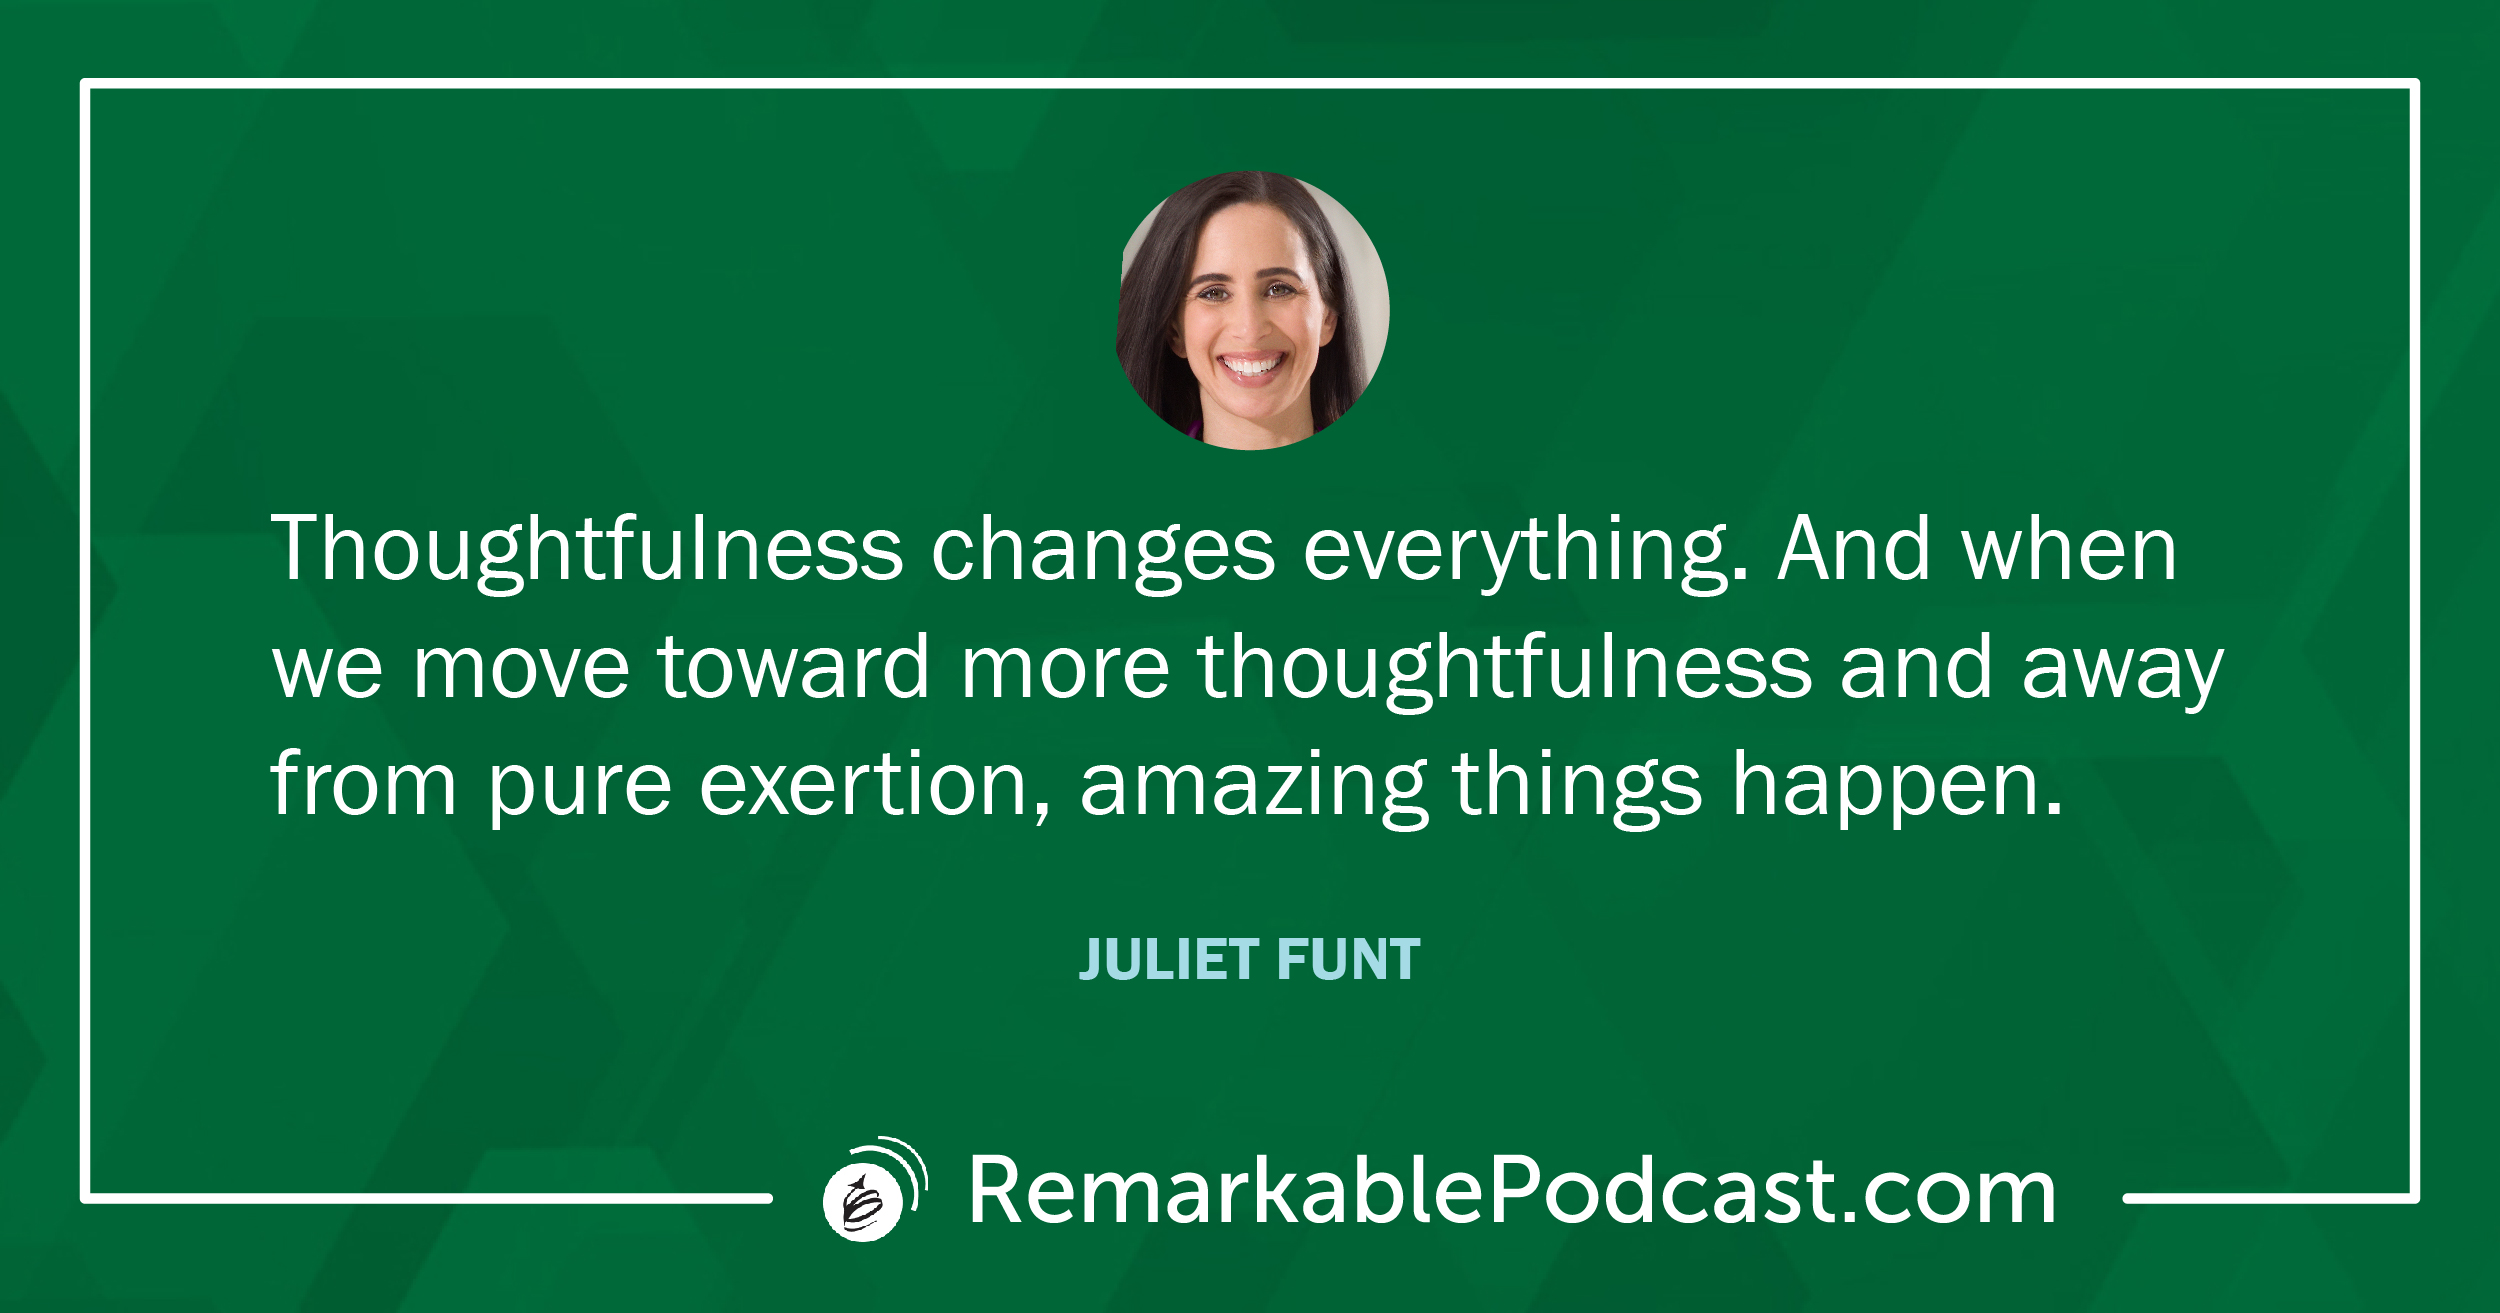 Quote Image: Thoughtfulness changes everything. And when we move toward more thoughtfulness and away from pure exertion, amazing things happen. Said by Juliet Funt